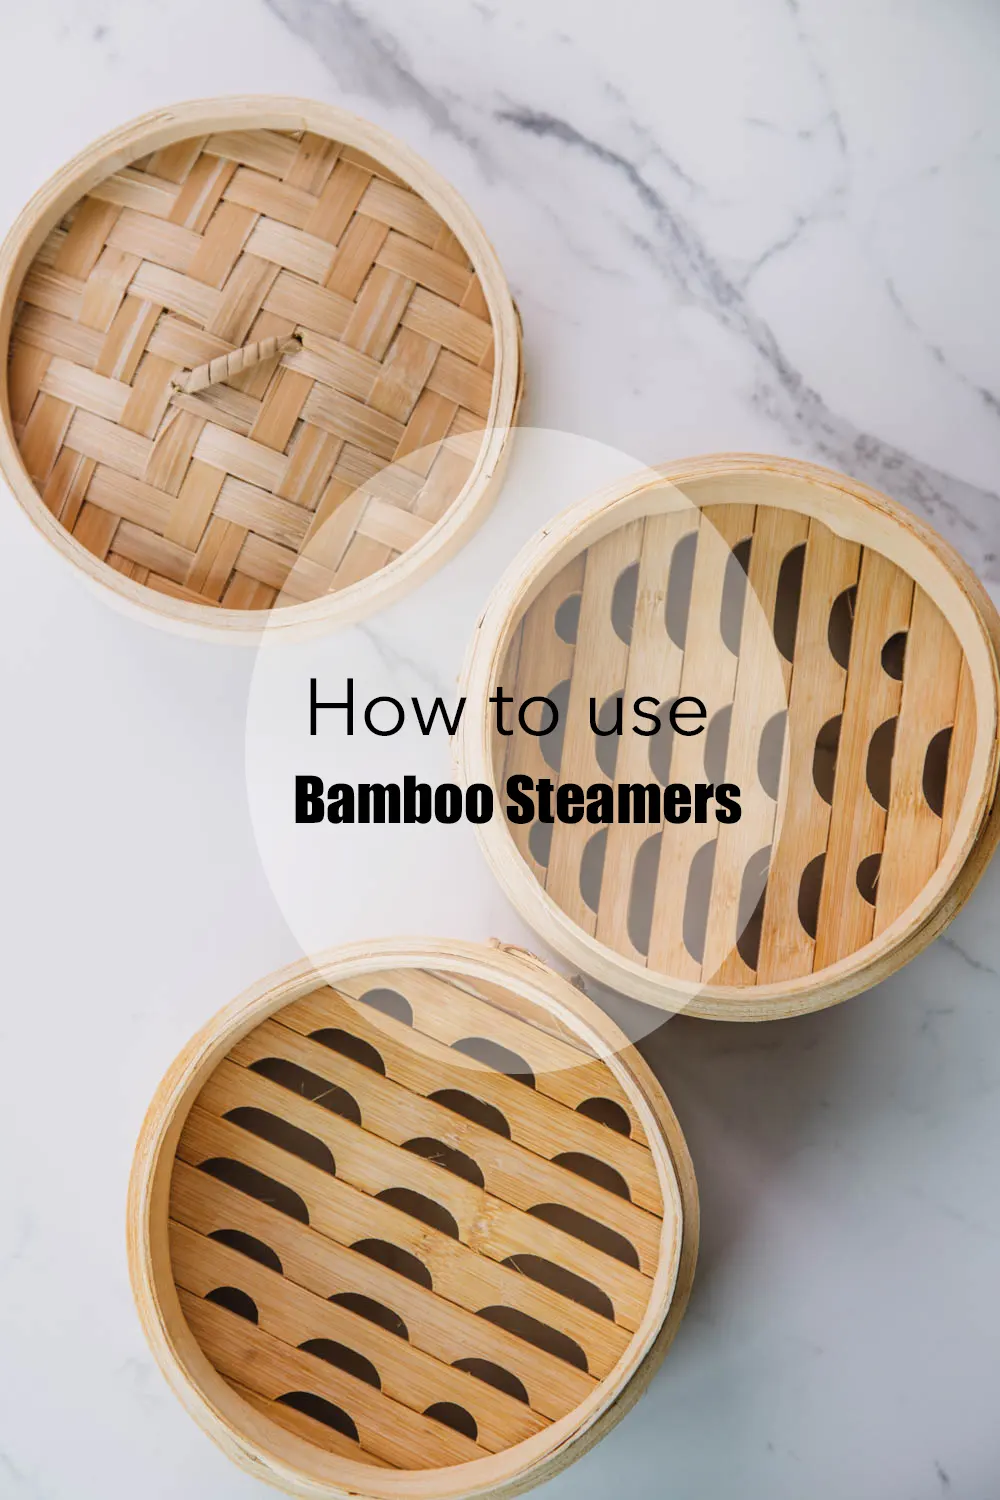 How to Use Bamboo Steamers - Basics and Inspirations - China Sichuan Food